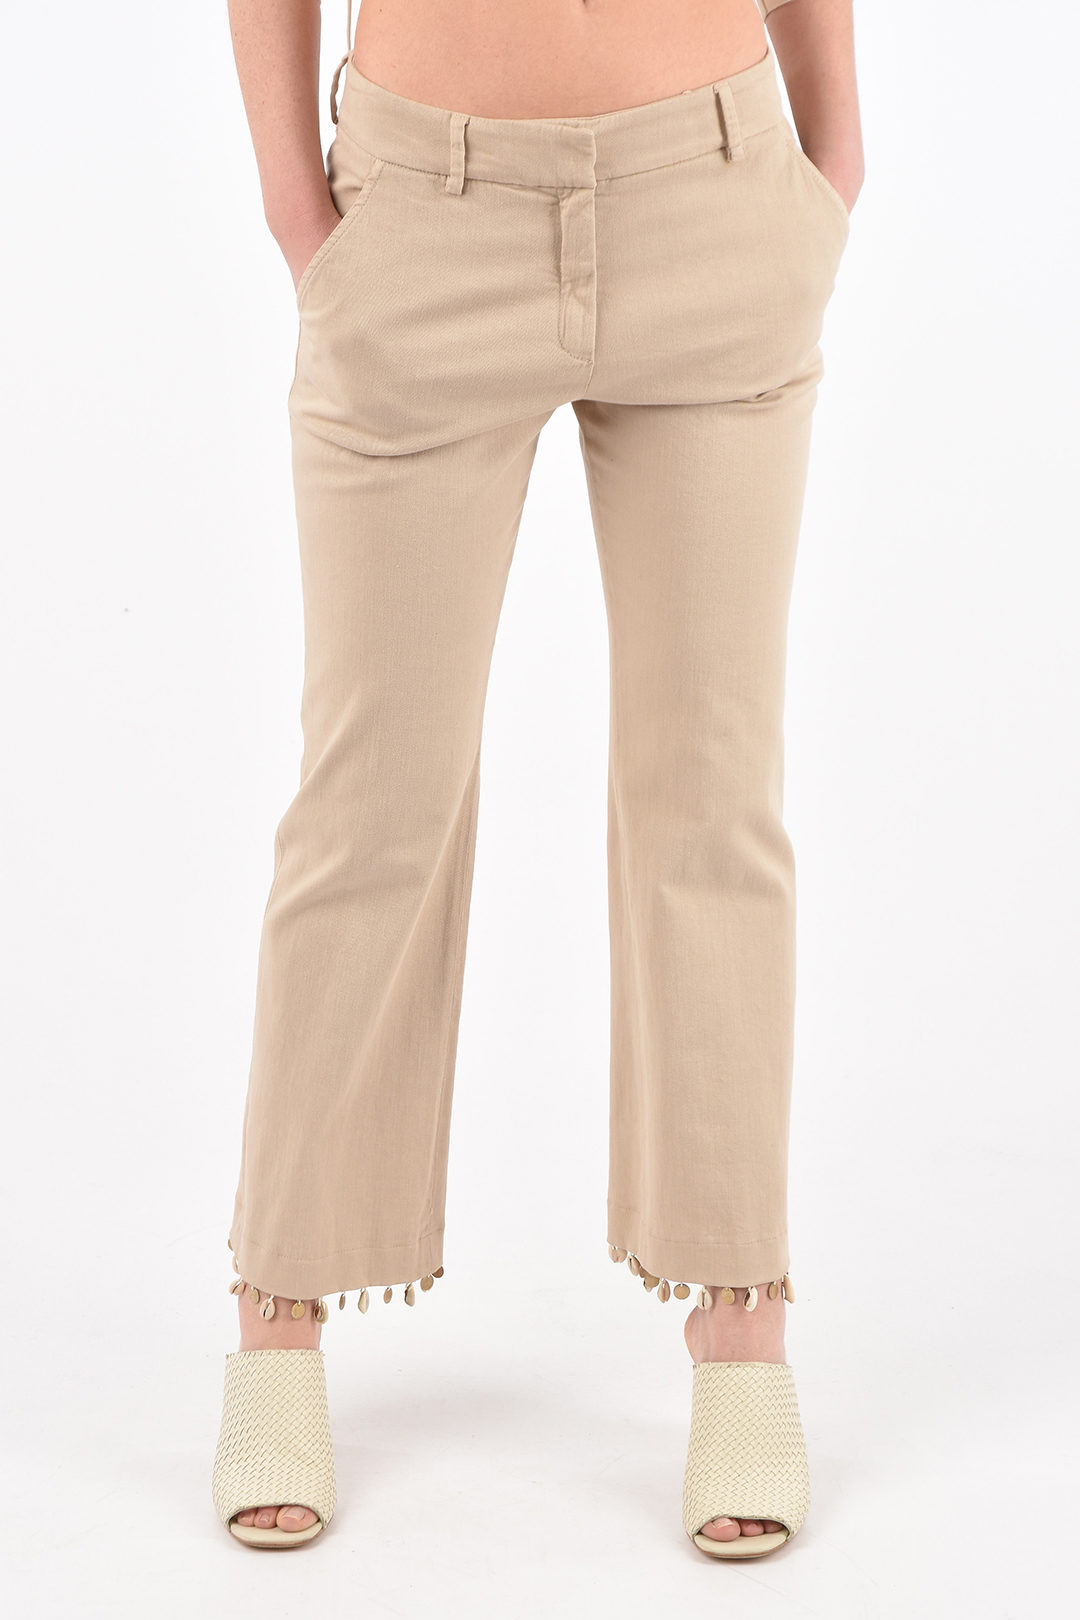 True Royal stretch cotton SANDY pants with shells on the bottom women ...